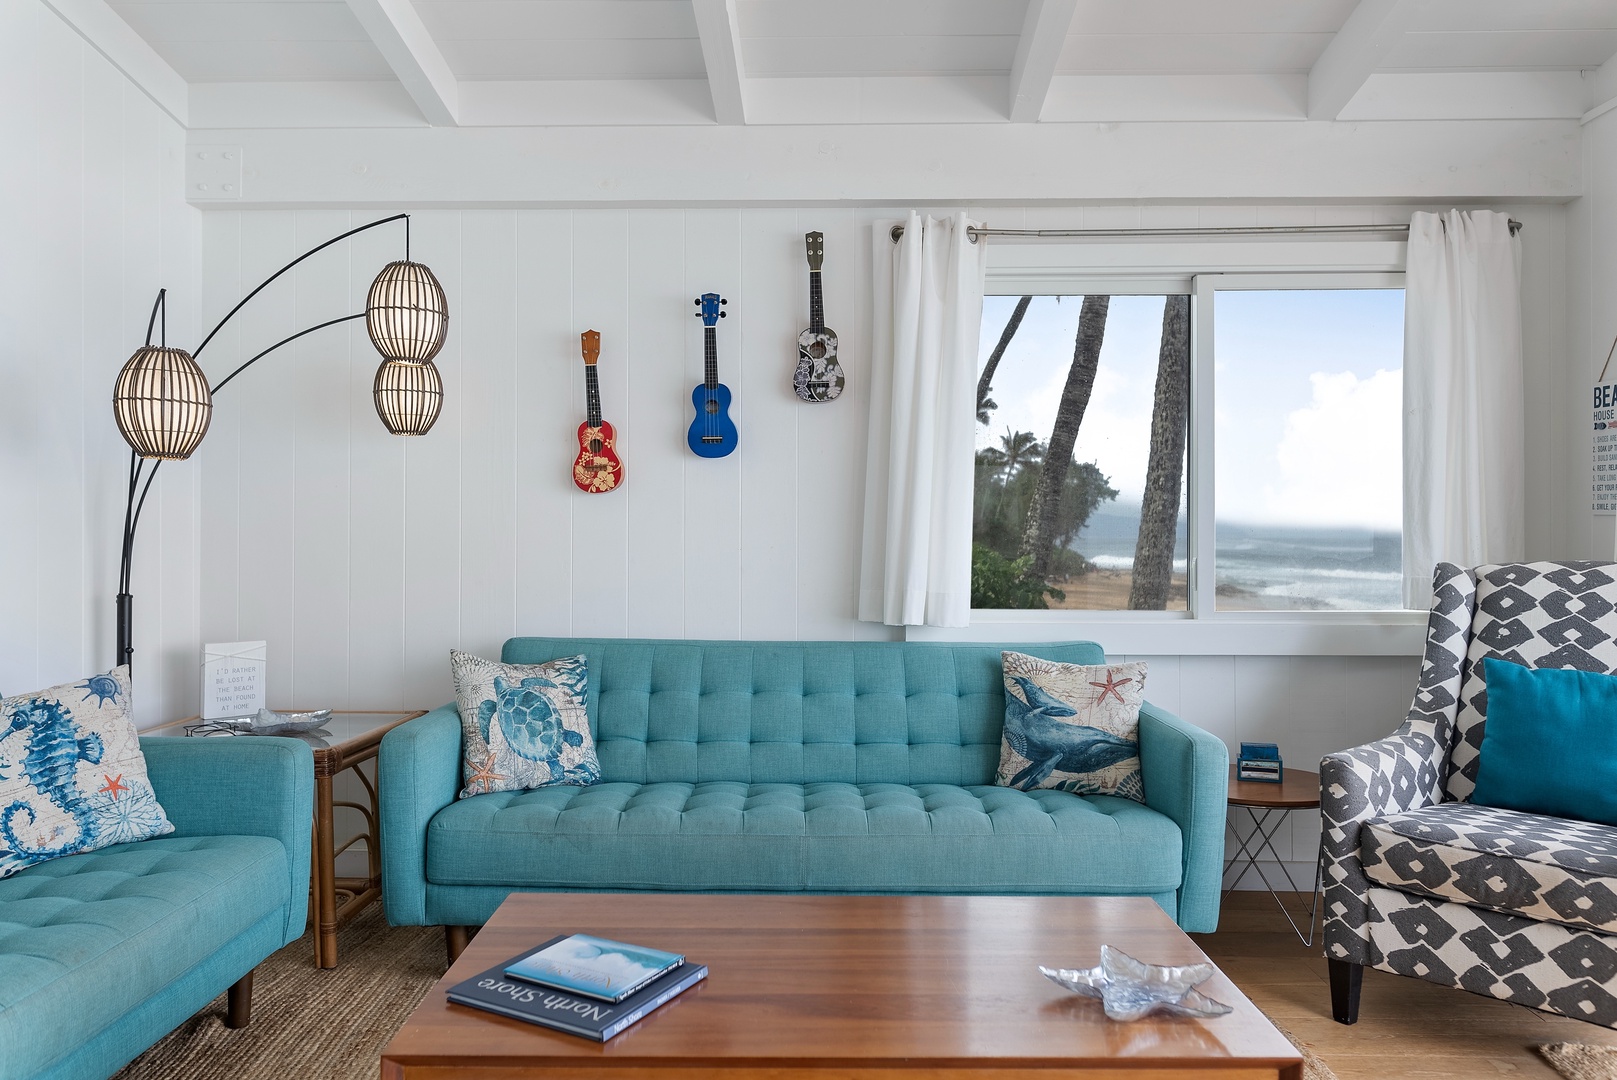 Haleiwa Vacation Rentals, Surfer's Paradise - Beautiful beach views from the comfort of your living room